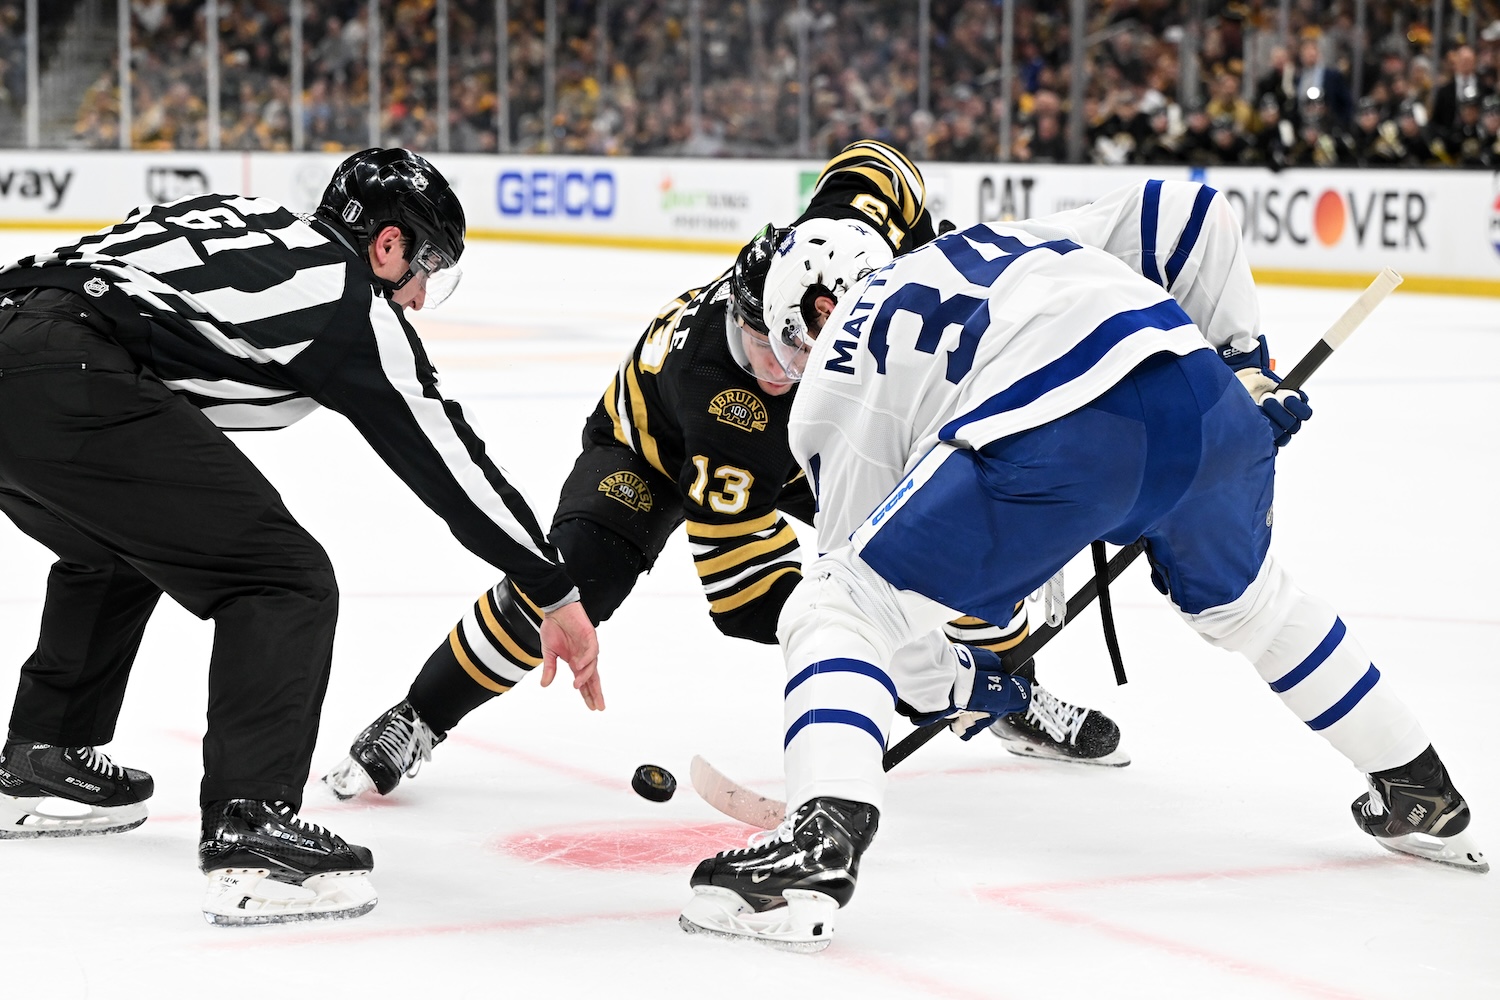 BOSTON, MASSACHUSETTS - APRIL 20: Auston Matthews #34 of the Toronto Maple Leafs and Charlie Coyle #13 of the Boston Bruins take a face-off in the Maple Leafs zone during the first period in Game One of the First Round of the 2024 Stanley Cup Playoffs at TD Garden on April 20, 2024 in Boston, Massachusetts. (Photo by Brian Fluharty/Getty Images)